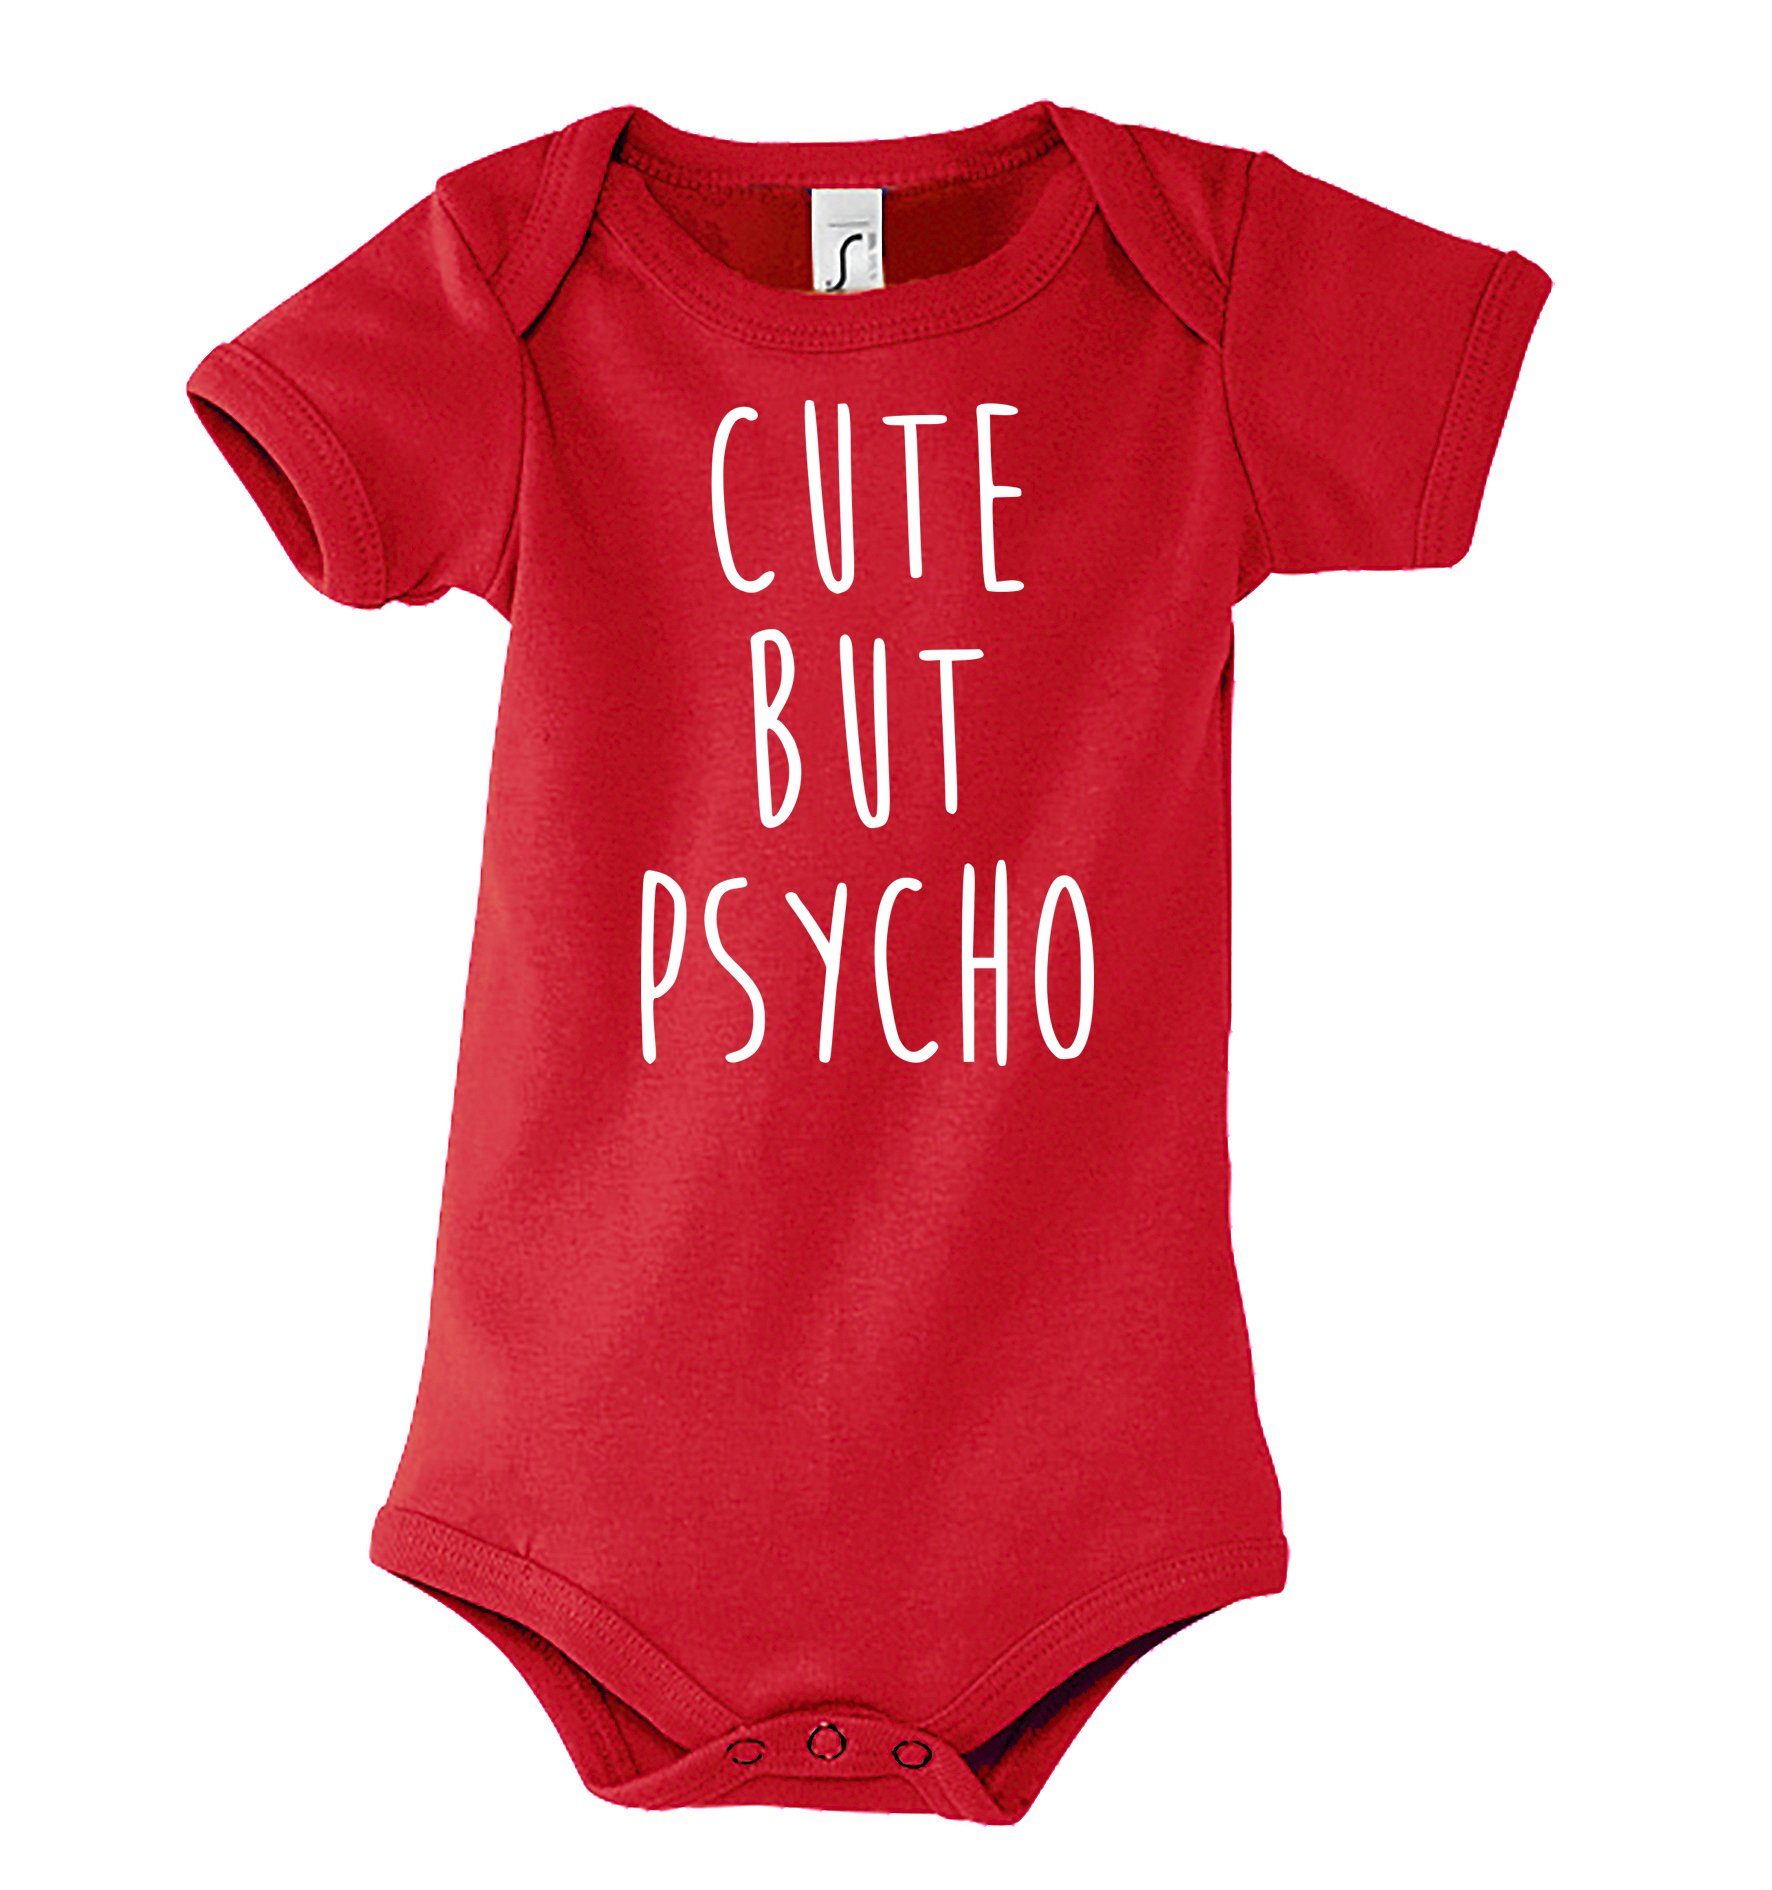 Youth Designz Kurzarmbody Baby Body Strampler Cut but Psycho in tollem Design, mit Frontprint Rot